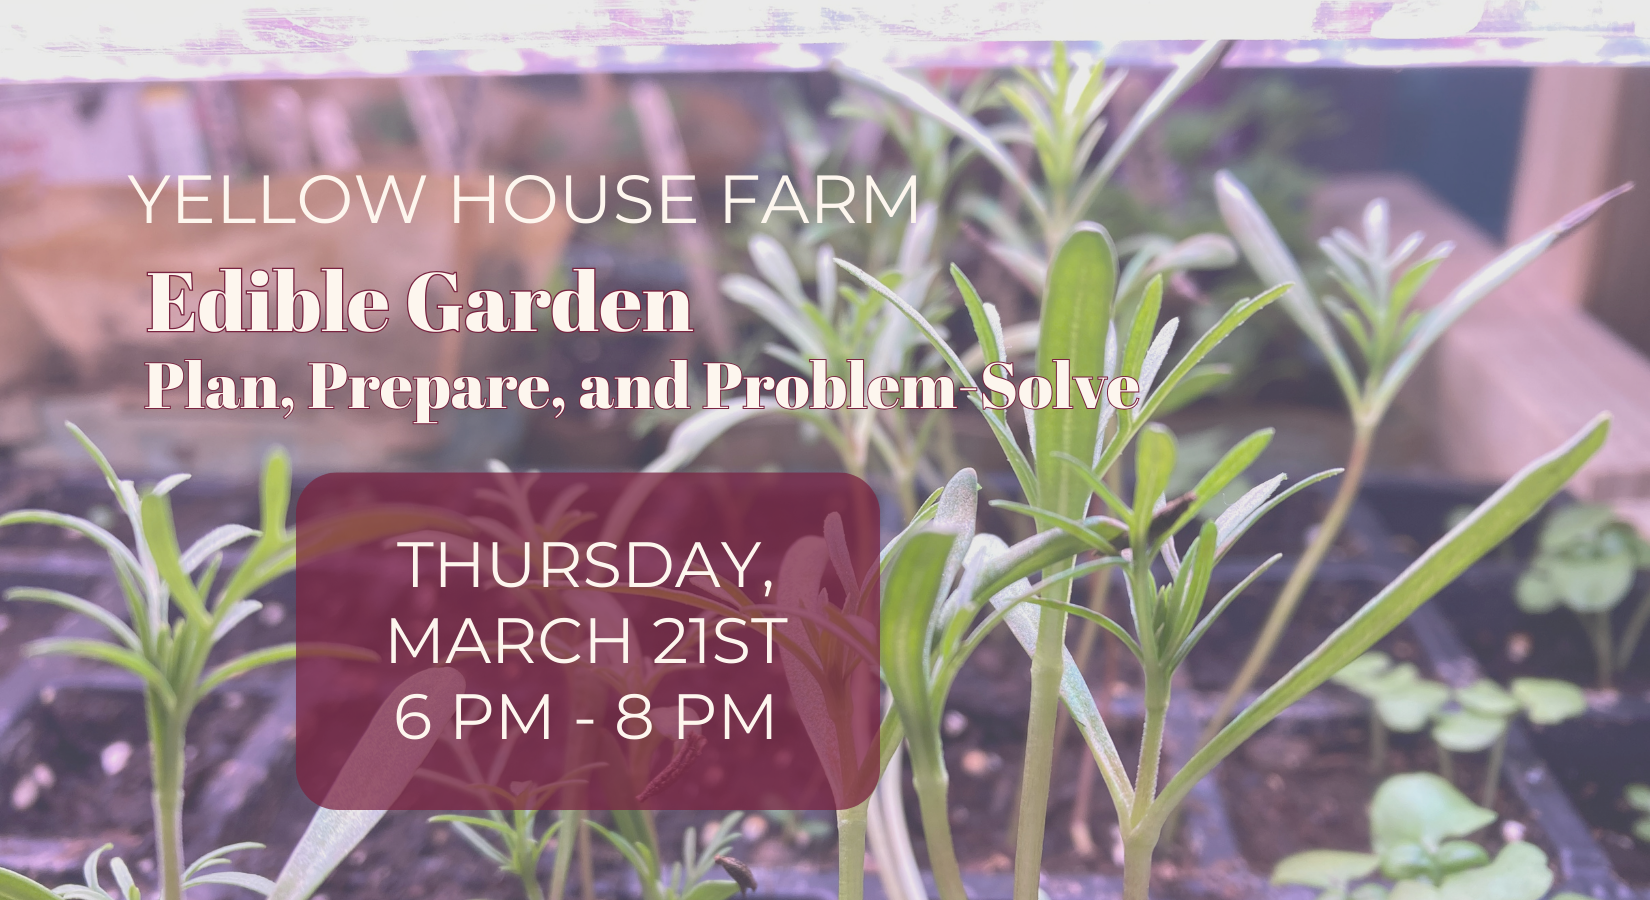 Yellow House Farm Edible Garden Flyer for March 21st 6-8pm